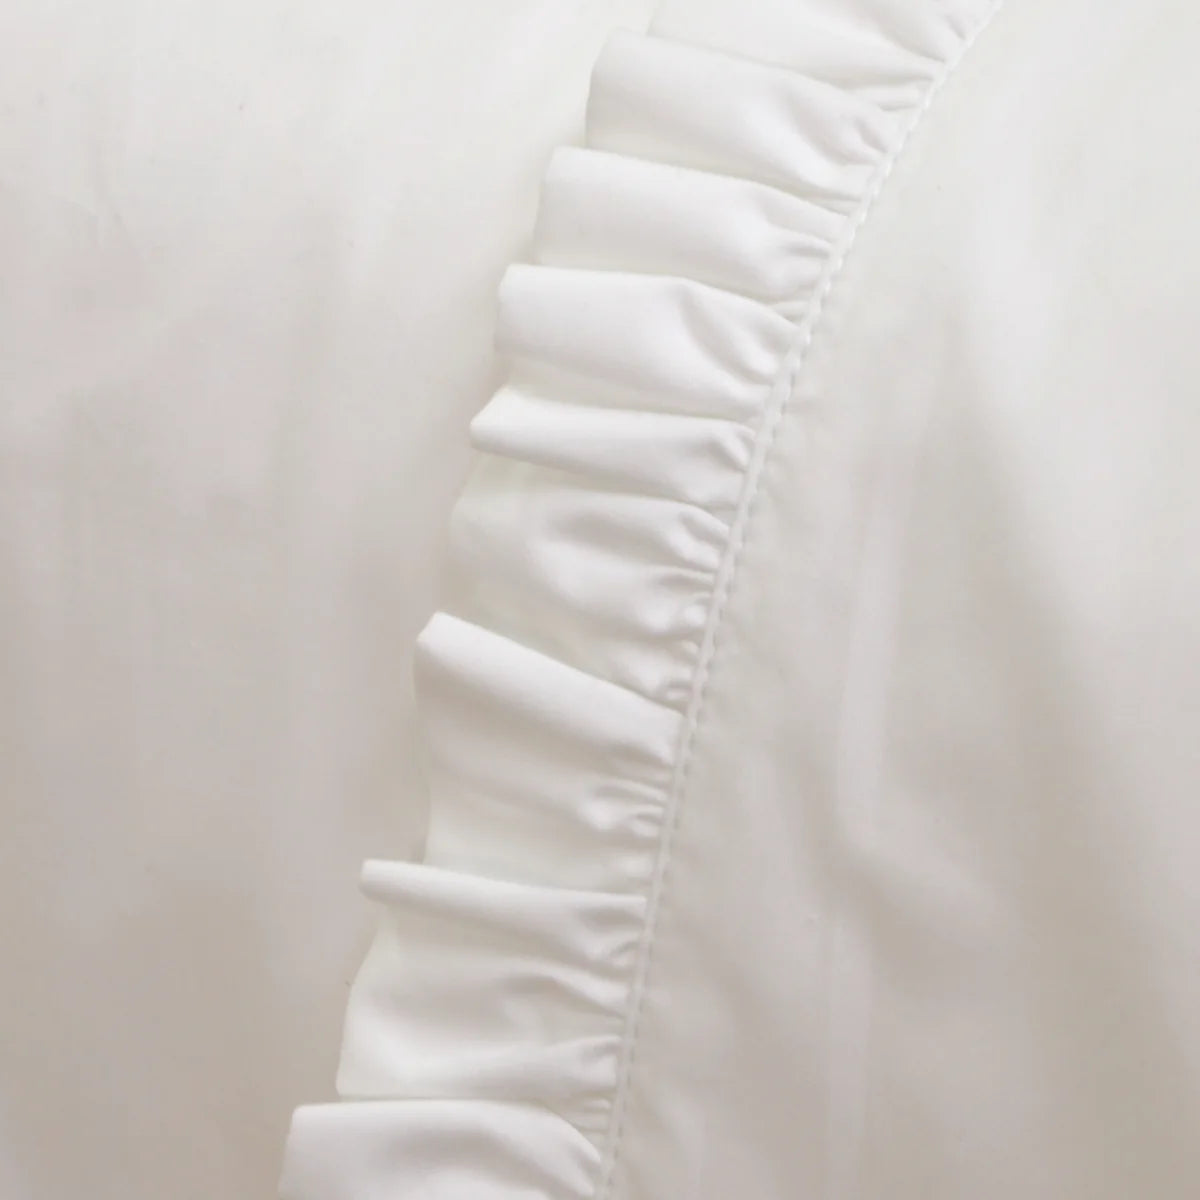 Audrey Ruffle Cotton Percale Pillowcases Pom Pom at Home